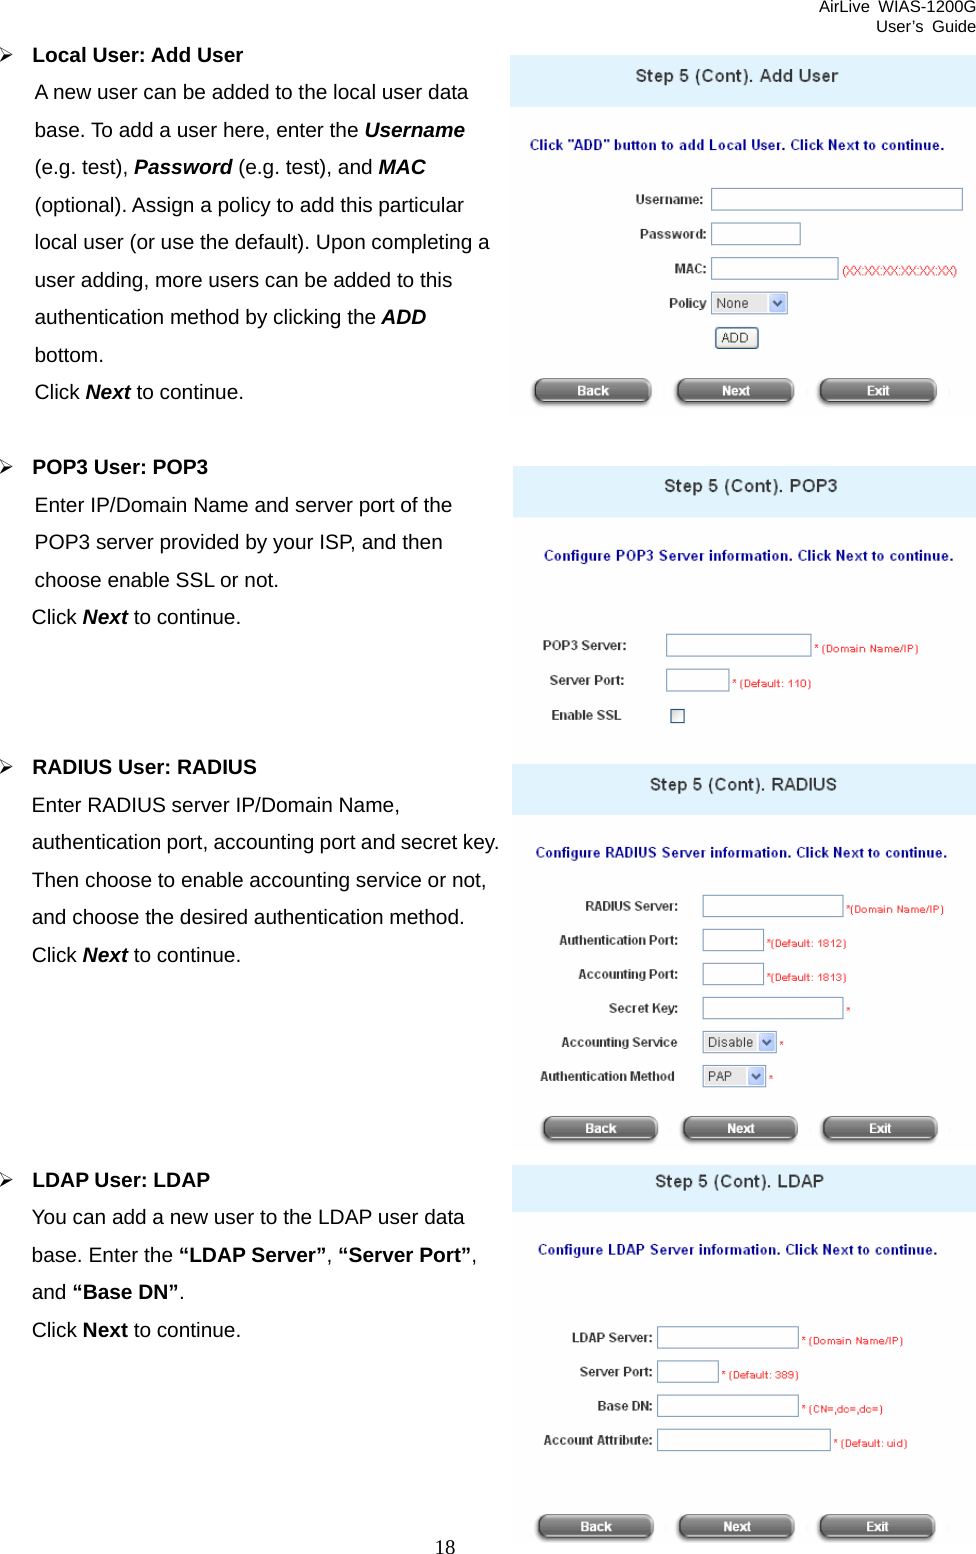 AirLive WIAS-1200G User’s Guide 18 dded to the local user data Username ting a  ¾ Enter IP/Domain Name and server port of the d by your ISP, and then   ¾ RADIUS User: RADIUS Enter RADIUS server IP/Domain Name, nting port and secret key. e or not,     ¾ LDAP User: LDAP You can add a new user to the LDAP user data base. Enter the “LDAP Server”, “Server Port”,    ¾ Local User: Add User A new user can be abase. To add a user here, enter the (e.g. test), Password (e.g. test), and MAC (optional). Assign a policy to add this particular local user (or use the default). Upon compleuser adding, more users can be added to this authentication method by clicking the ADD bottom. Click Next to continue. POP3 User: POP3 POP3 server providechoose enable SSL or not. Click Next to continue.  authentication port, accouThen choose to enable accounting servicand choose the desired authentication method. Click Next to continue.   and “Base DN”. Click Next to continue.  